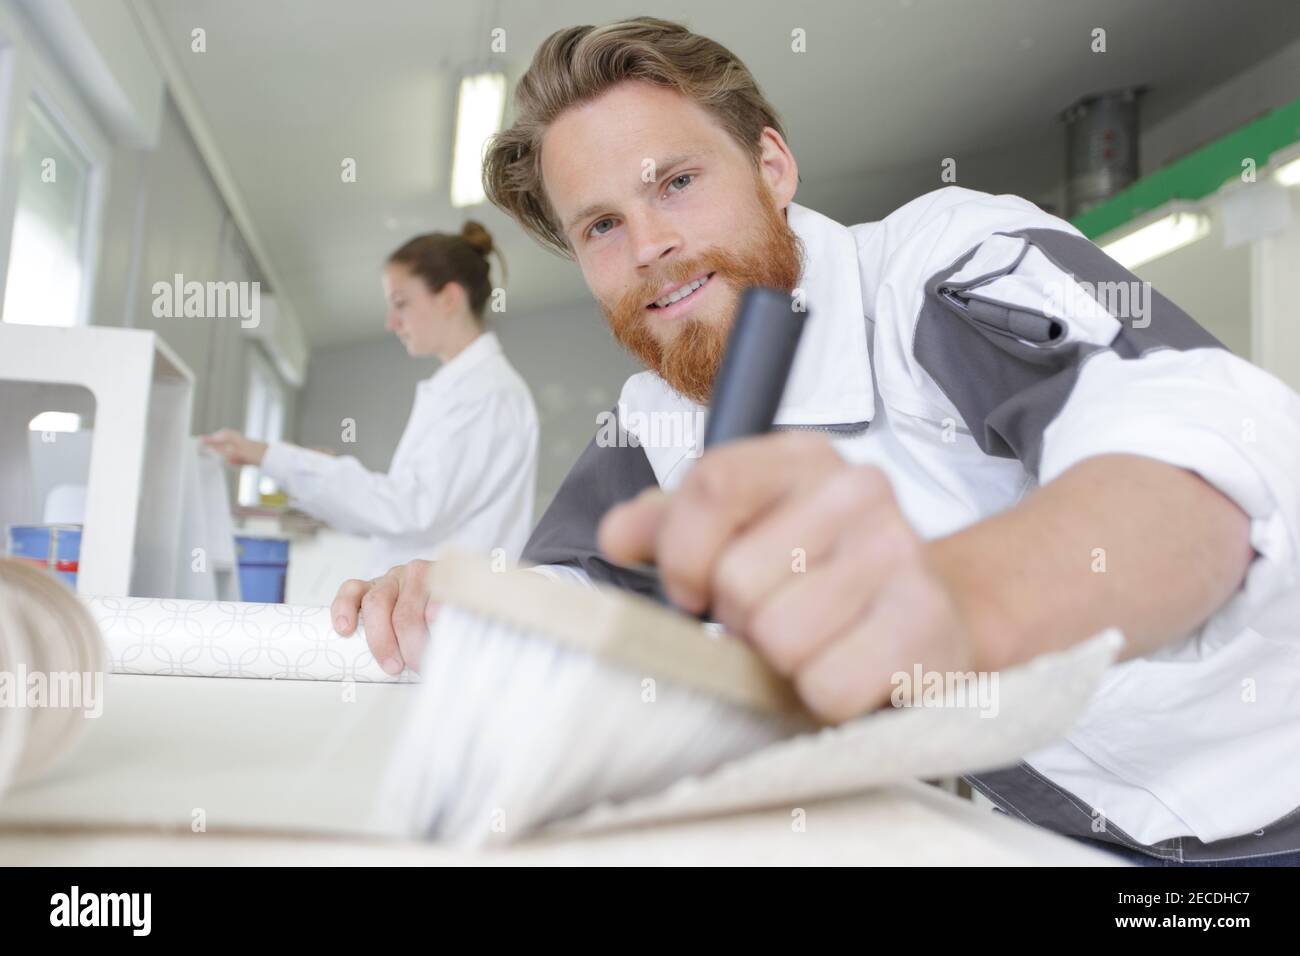 contractor worker preparing for wallpaper decoration Stock Photo